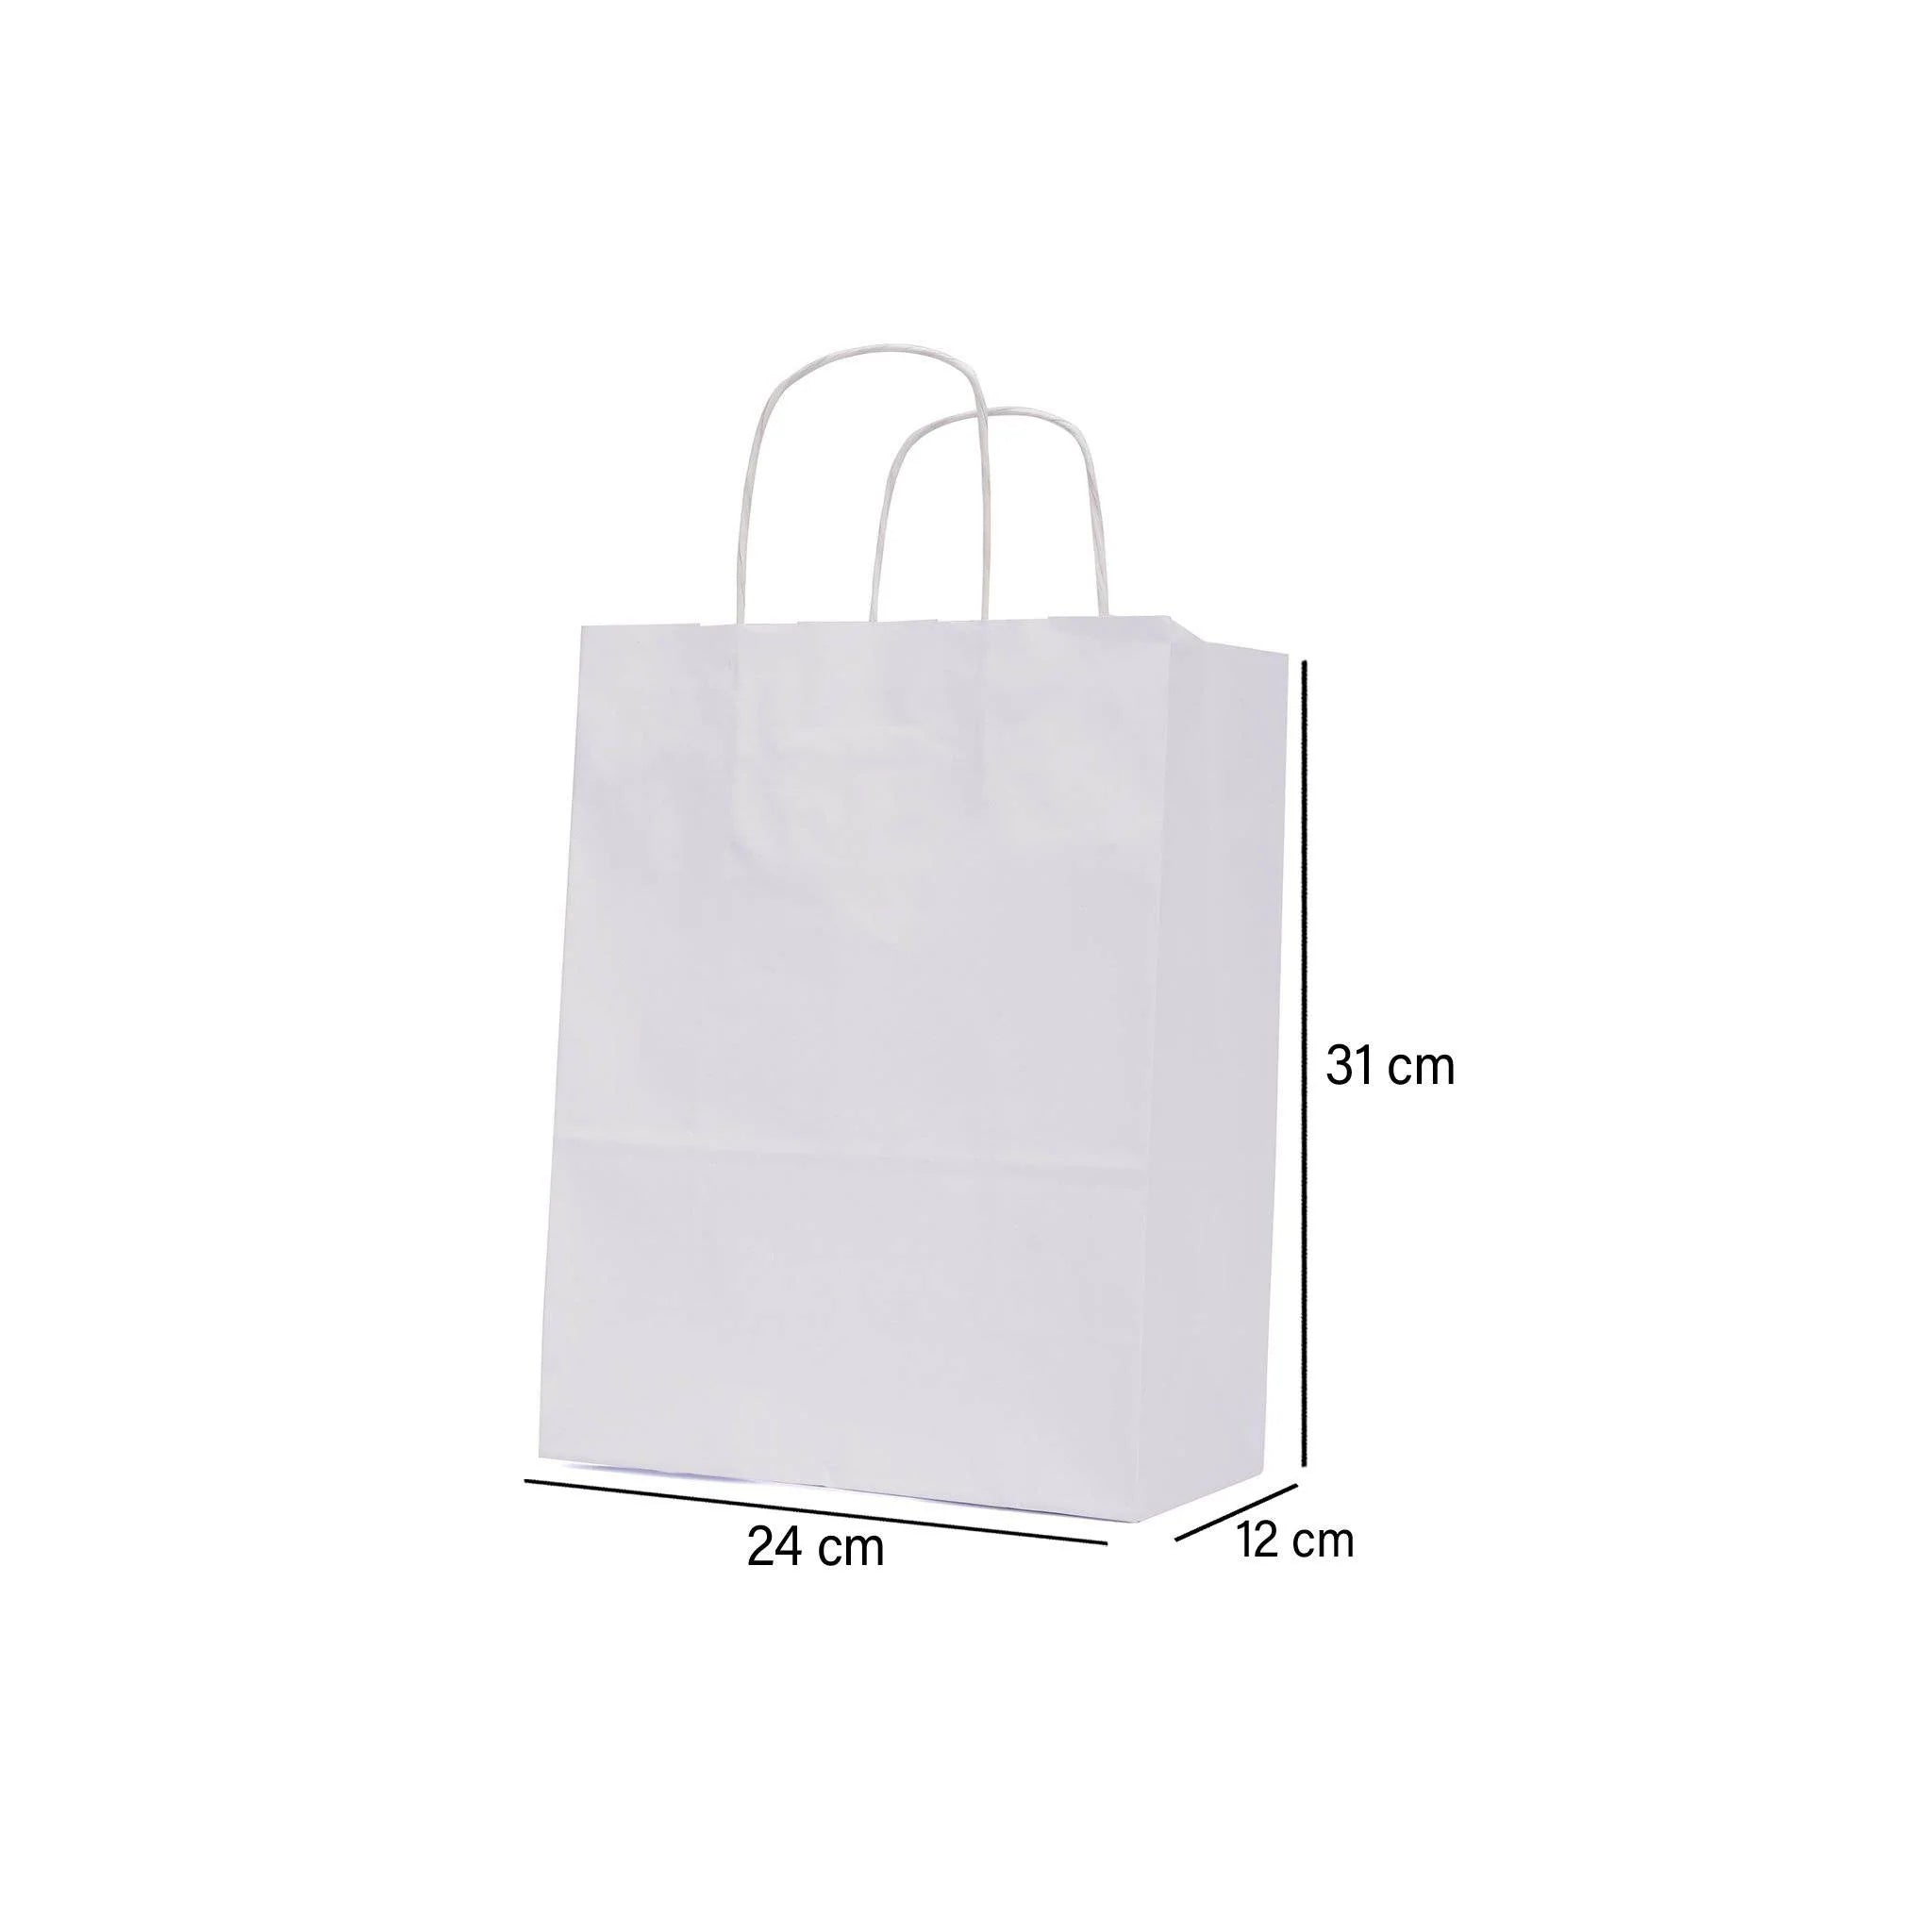 250 Pieces Twisted Handle White Paper Bag